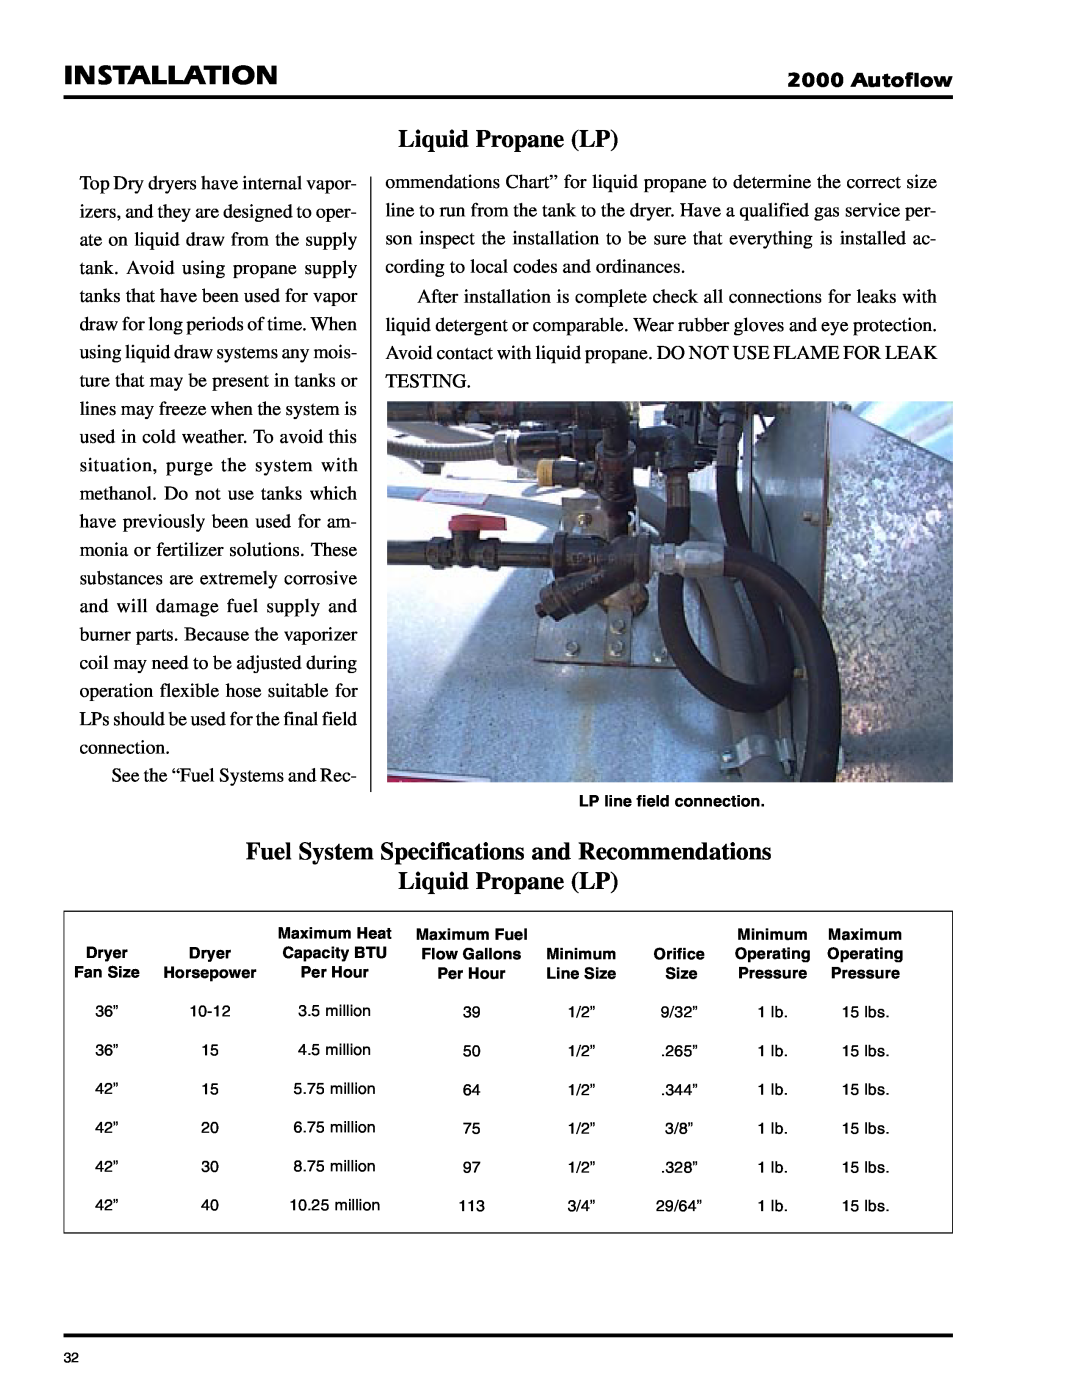 GSI Outdoors 2TFC, 2TAF Liquid Propane LP, Fuel System Specifications and Recommendations, Installation, Autoflow 